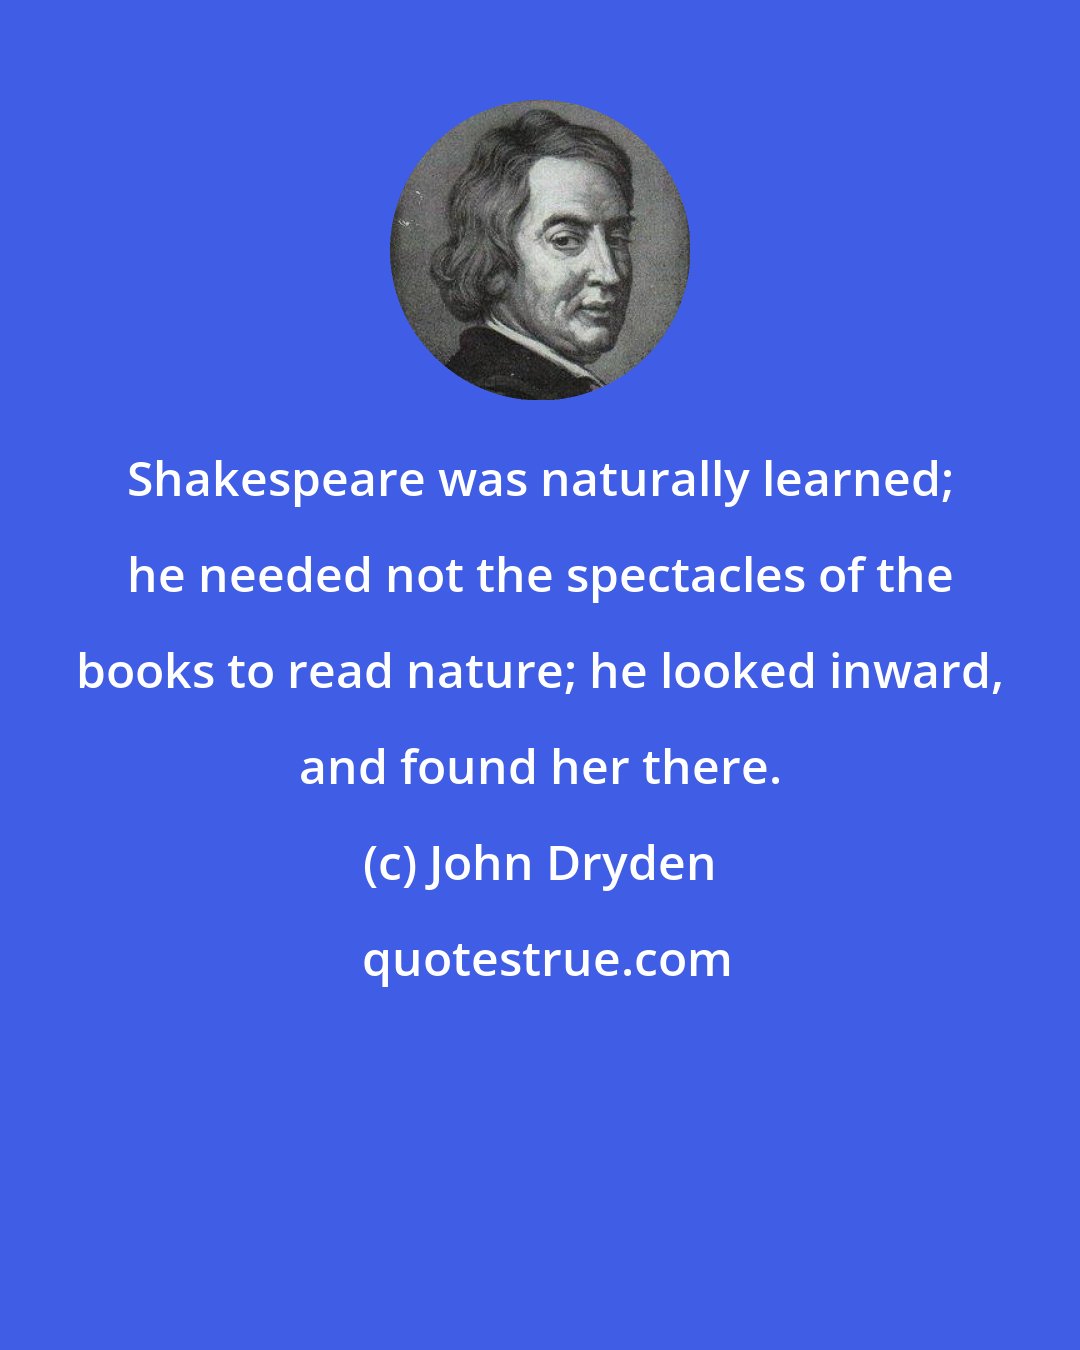 John Dryden: Shakespeare was naturally learned; he needed not the spectacles of the books to read nature; he looked inward, and found her there.